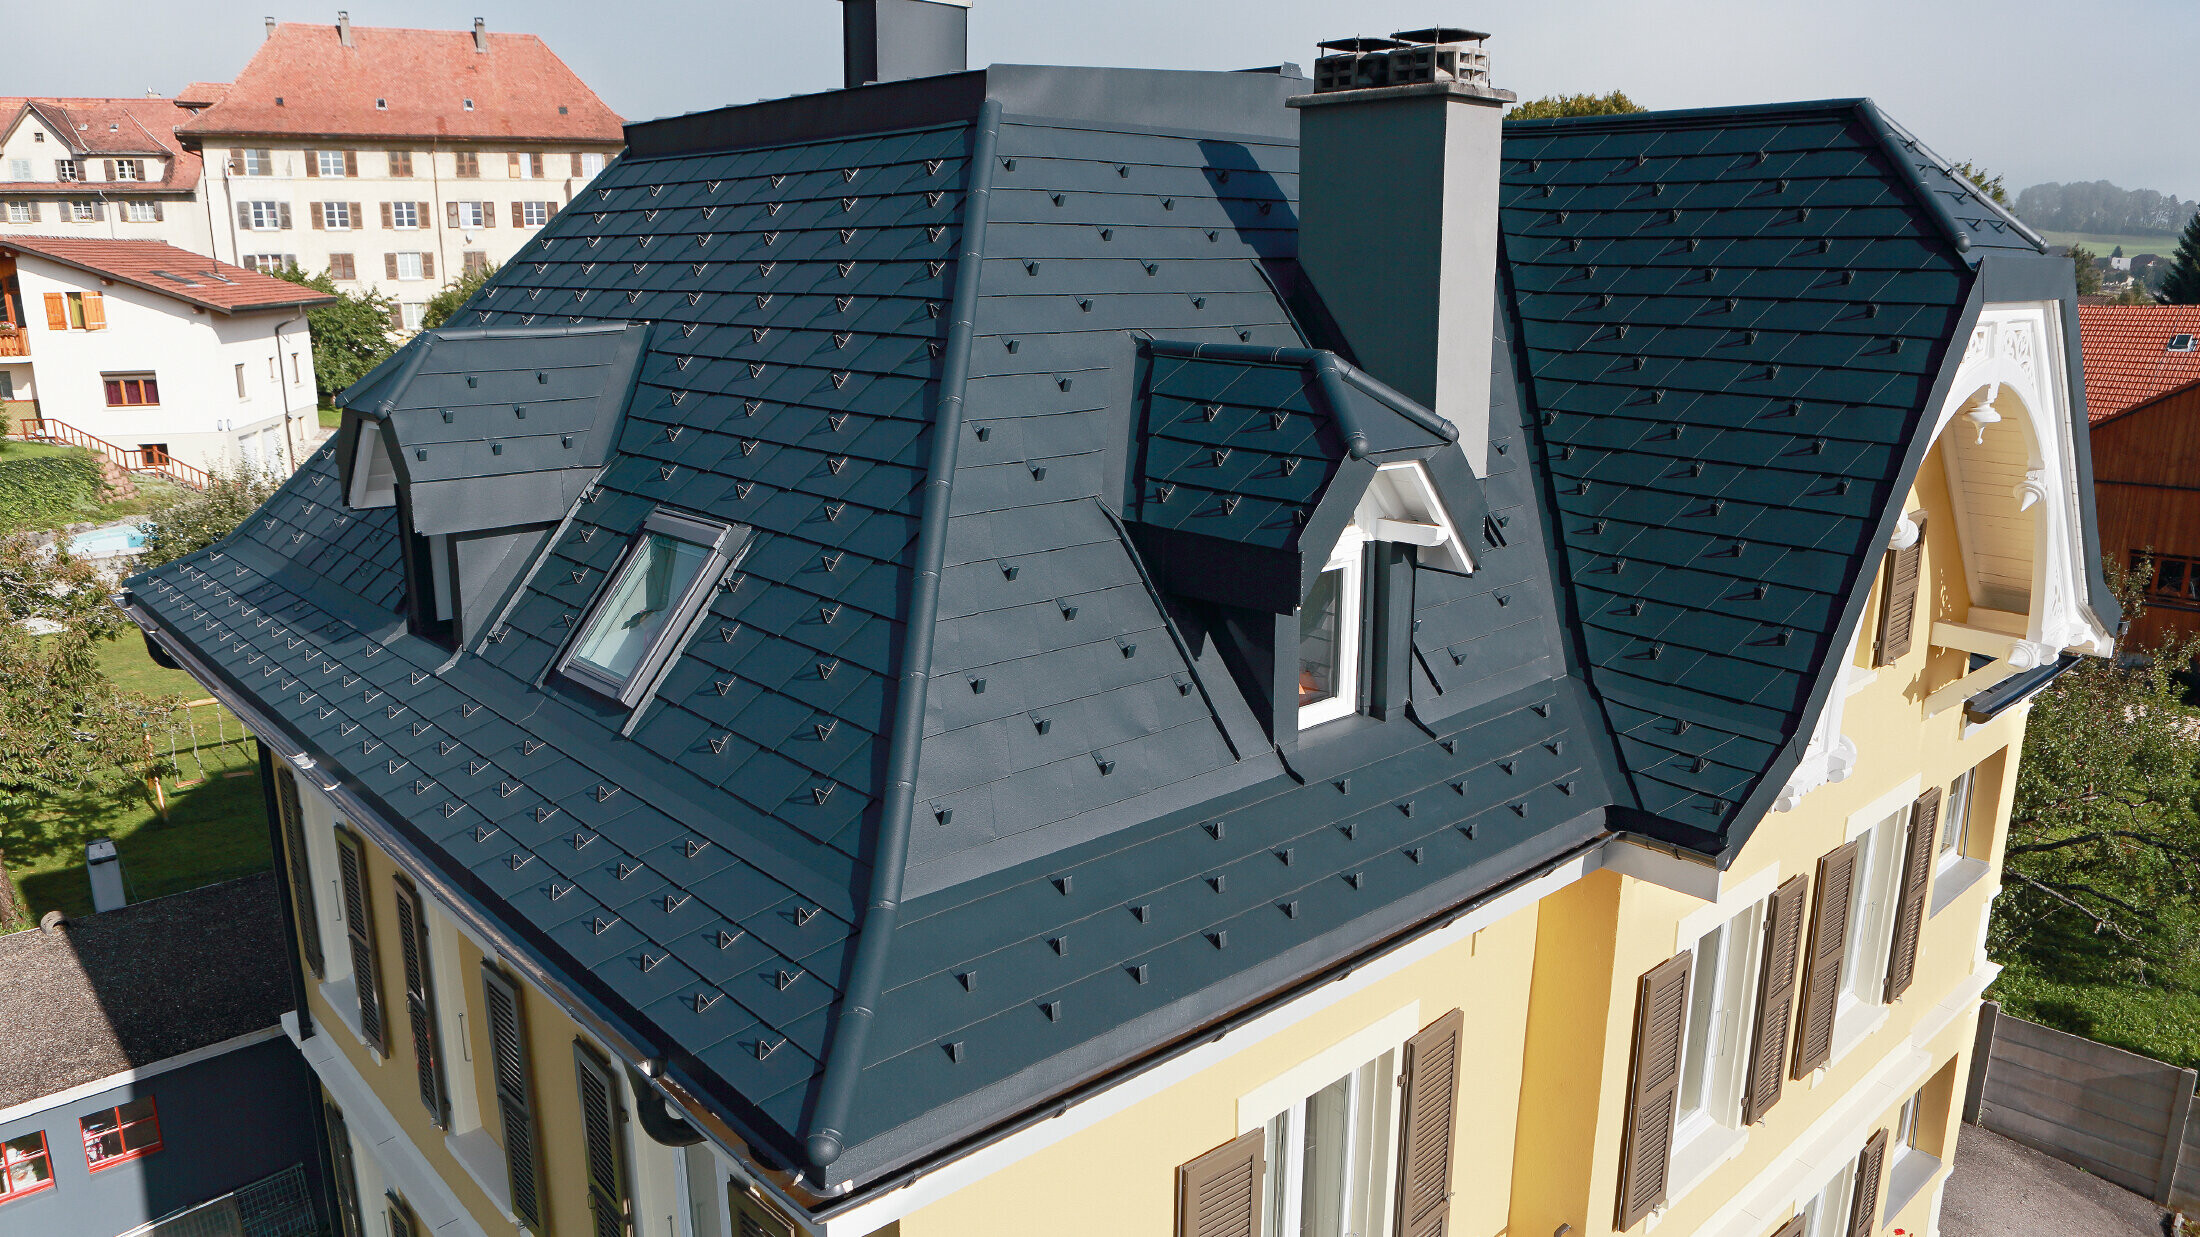 Villa in Switzerland, the roof has many valleys and small dormers, the roof is covered with an aluminium shingle from PREFA in P.10 anthracite.